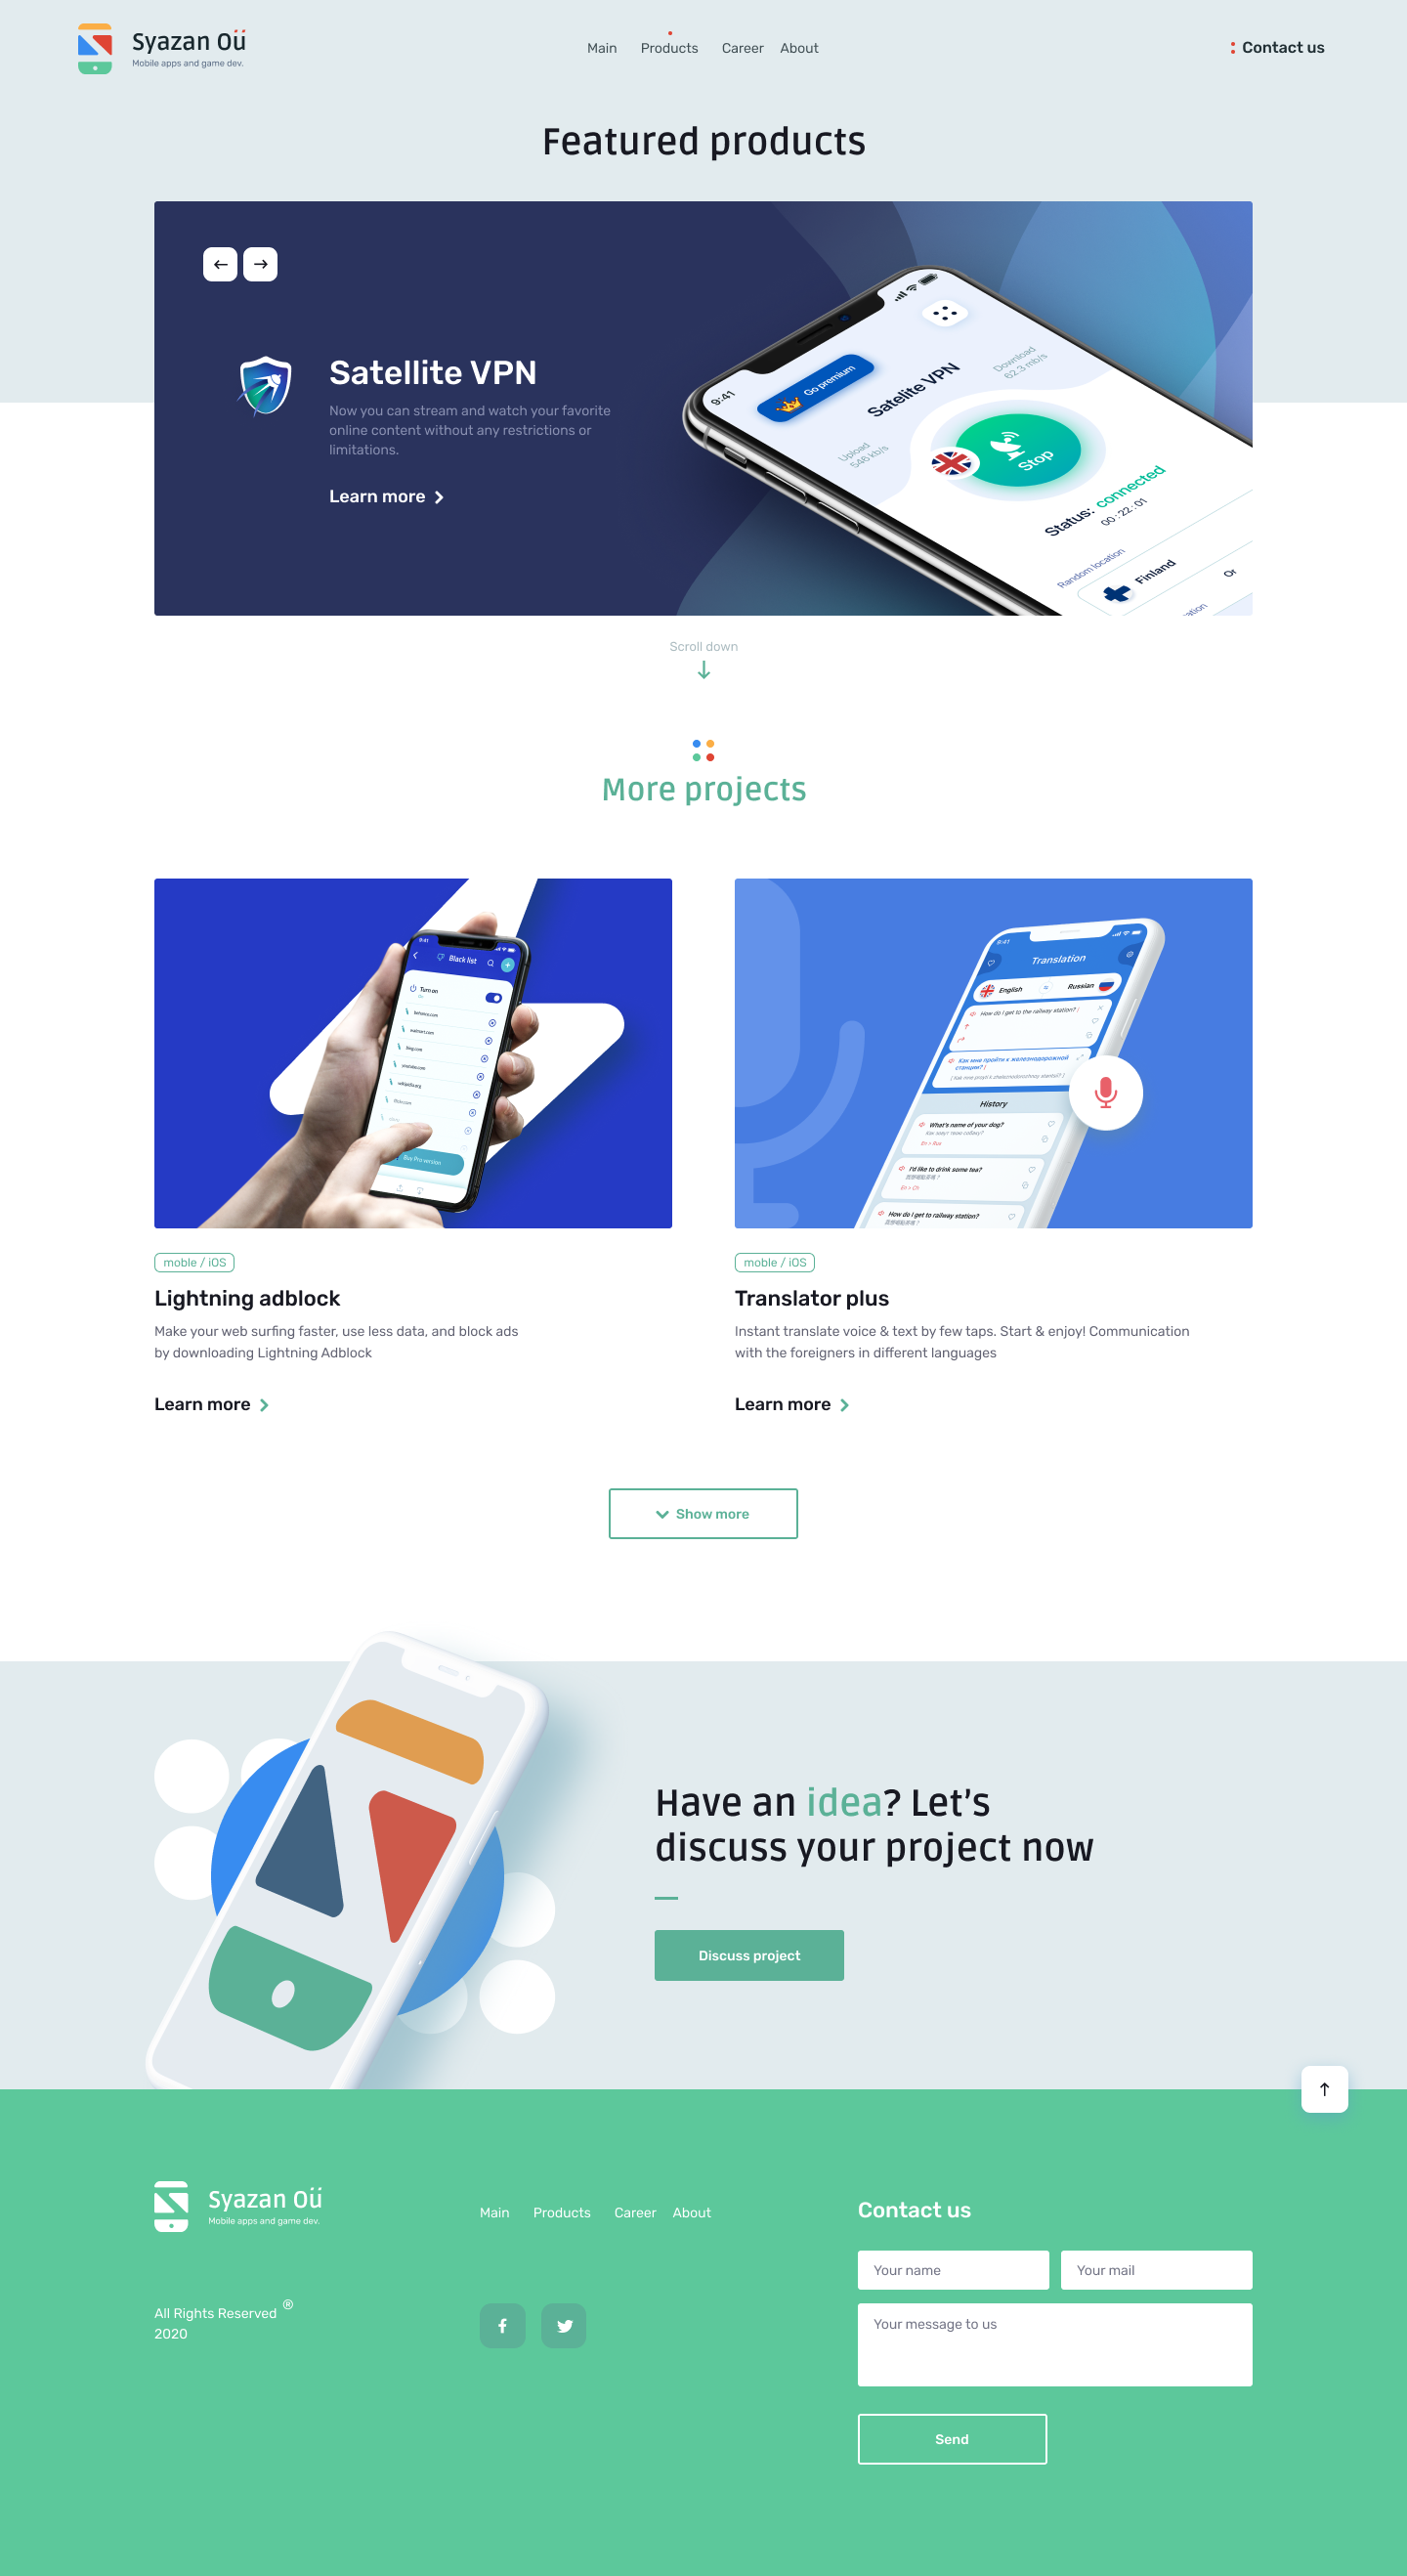 Projects page